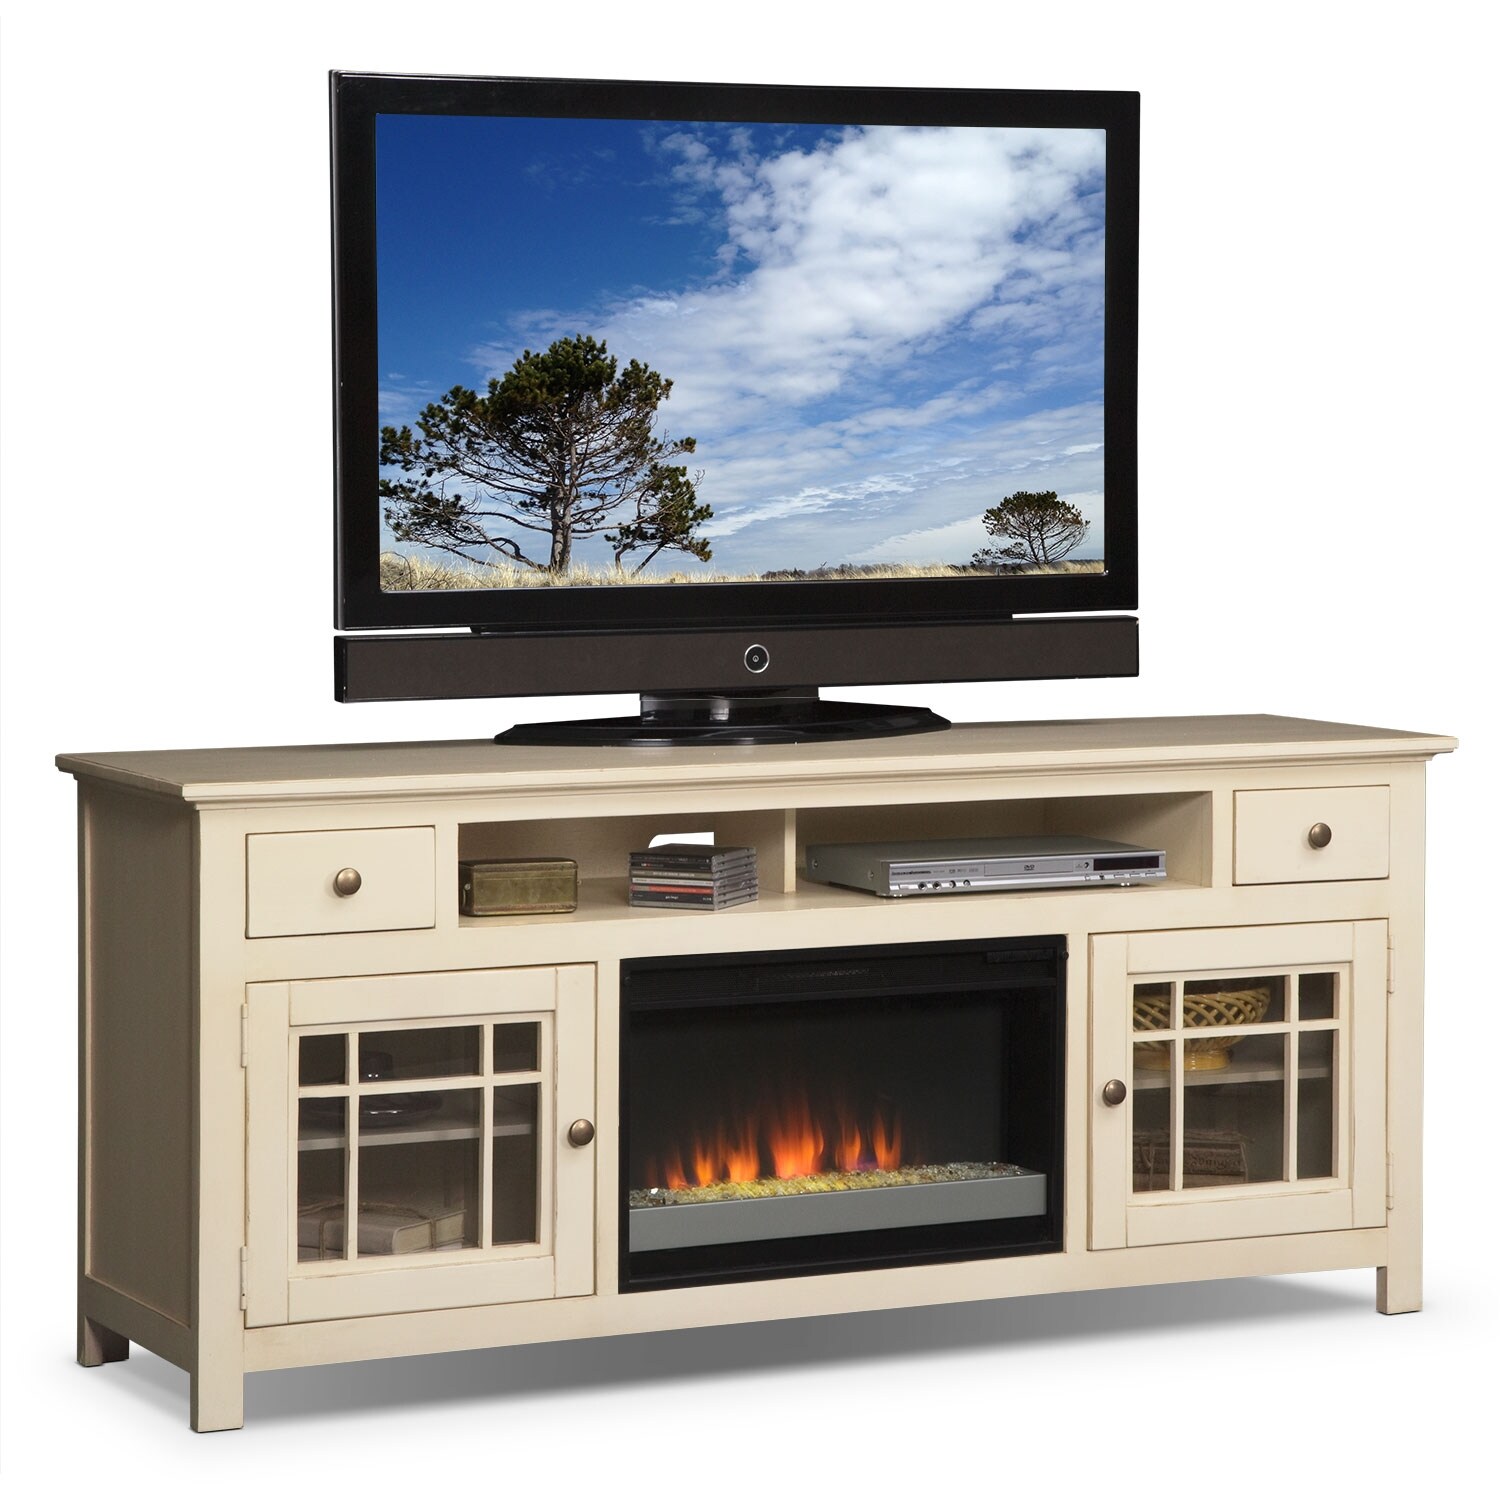 Merrick 74" Fireplace TV Stand with Contemporary Insert ...